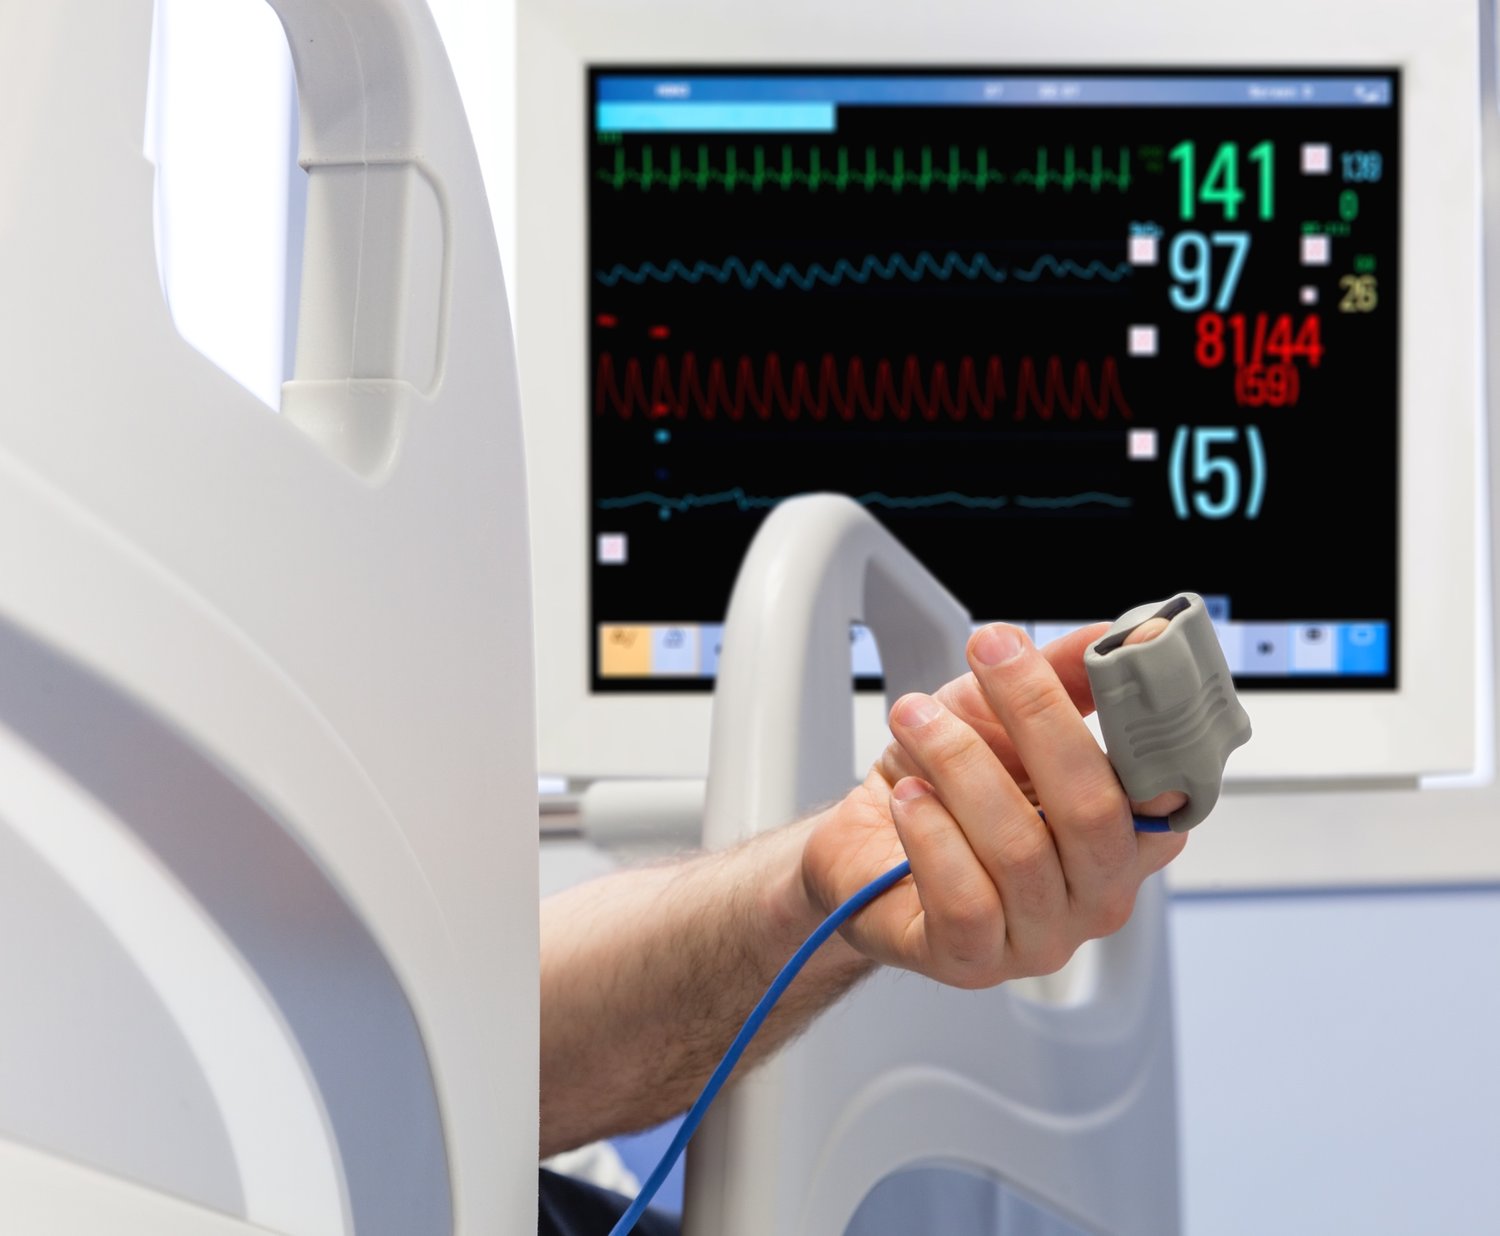 Medical Telemetry Market 2019 Expert Guide to Boost the Industry in Global Share